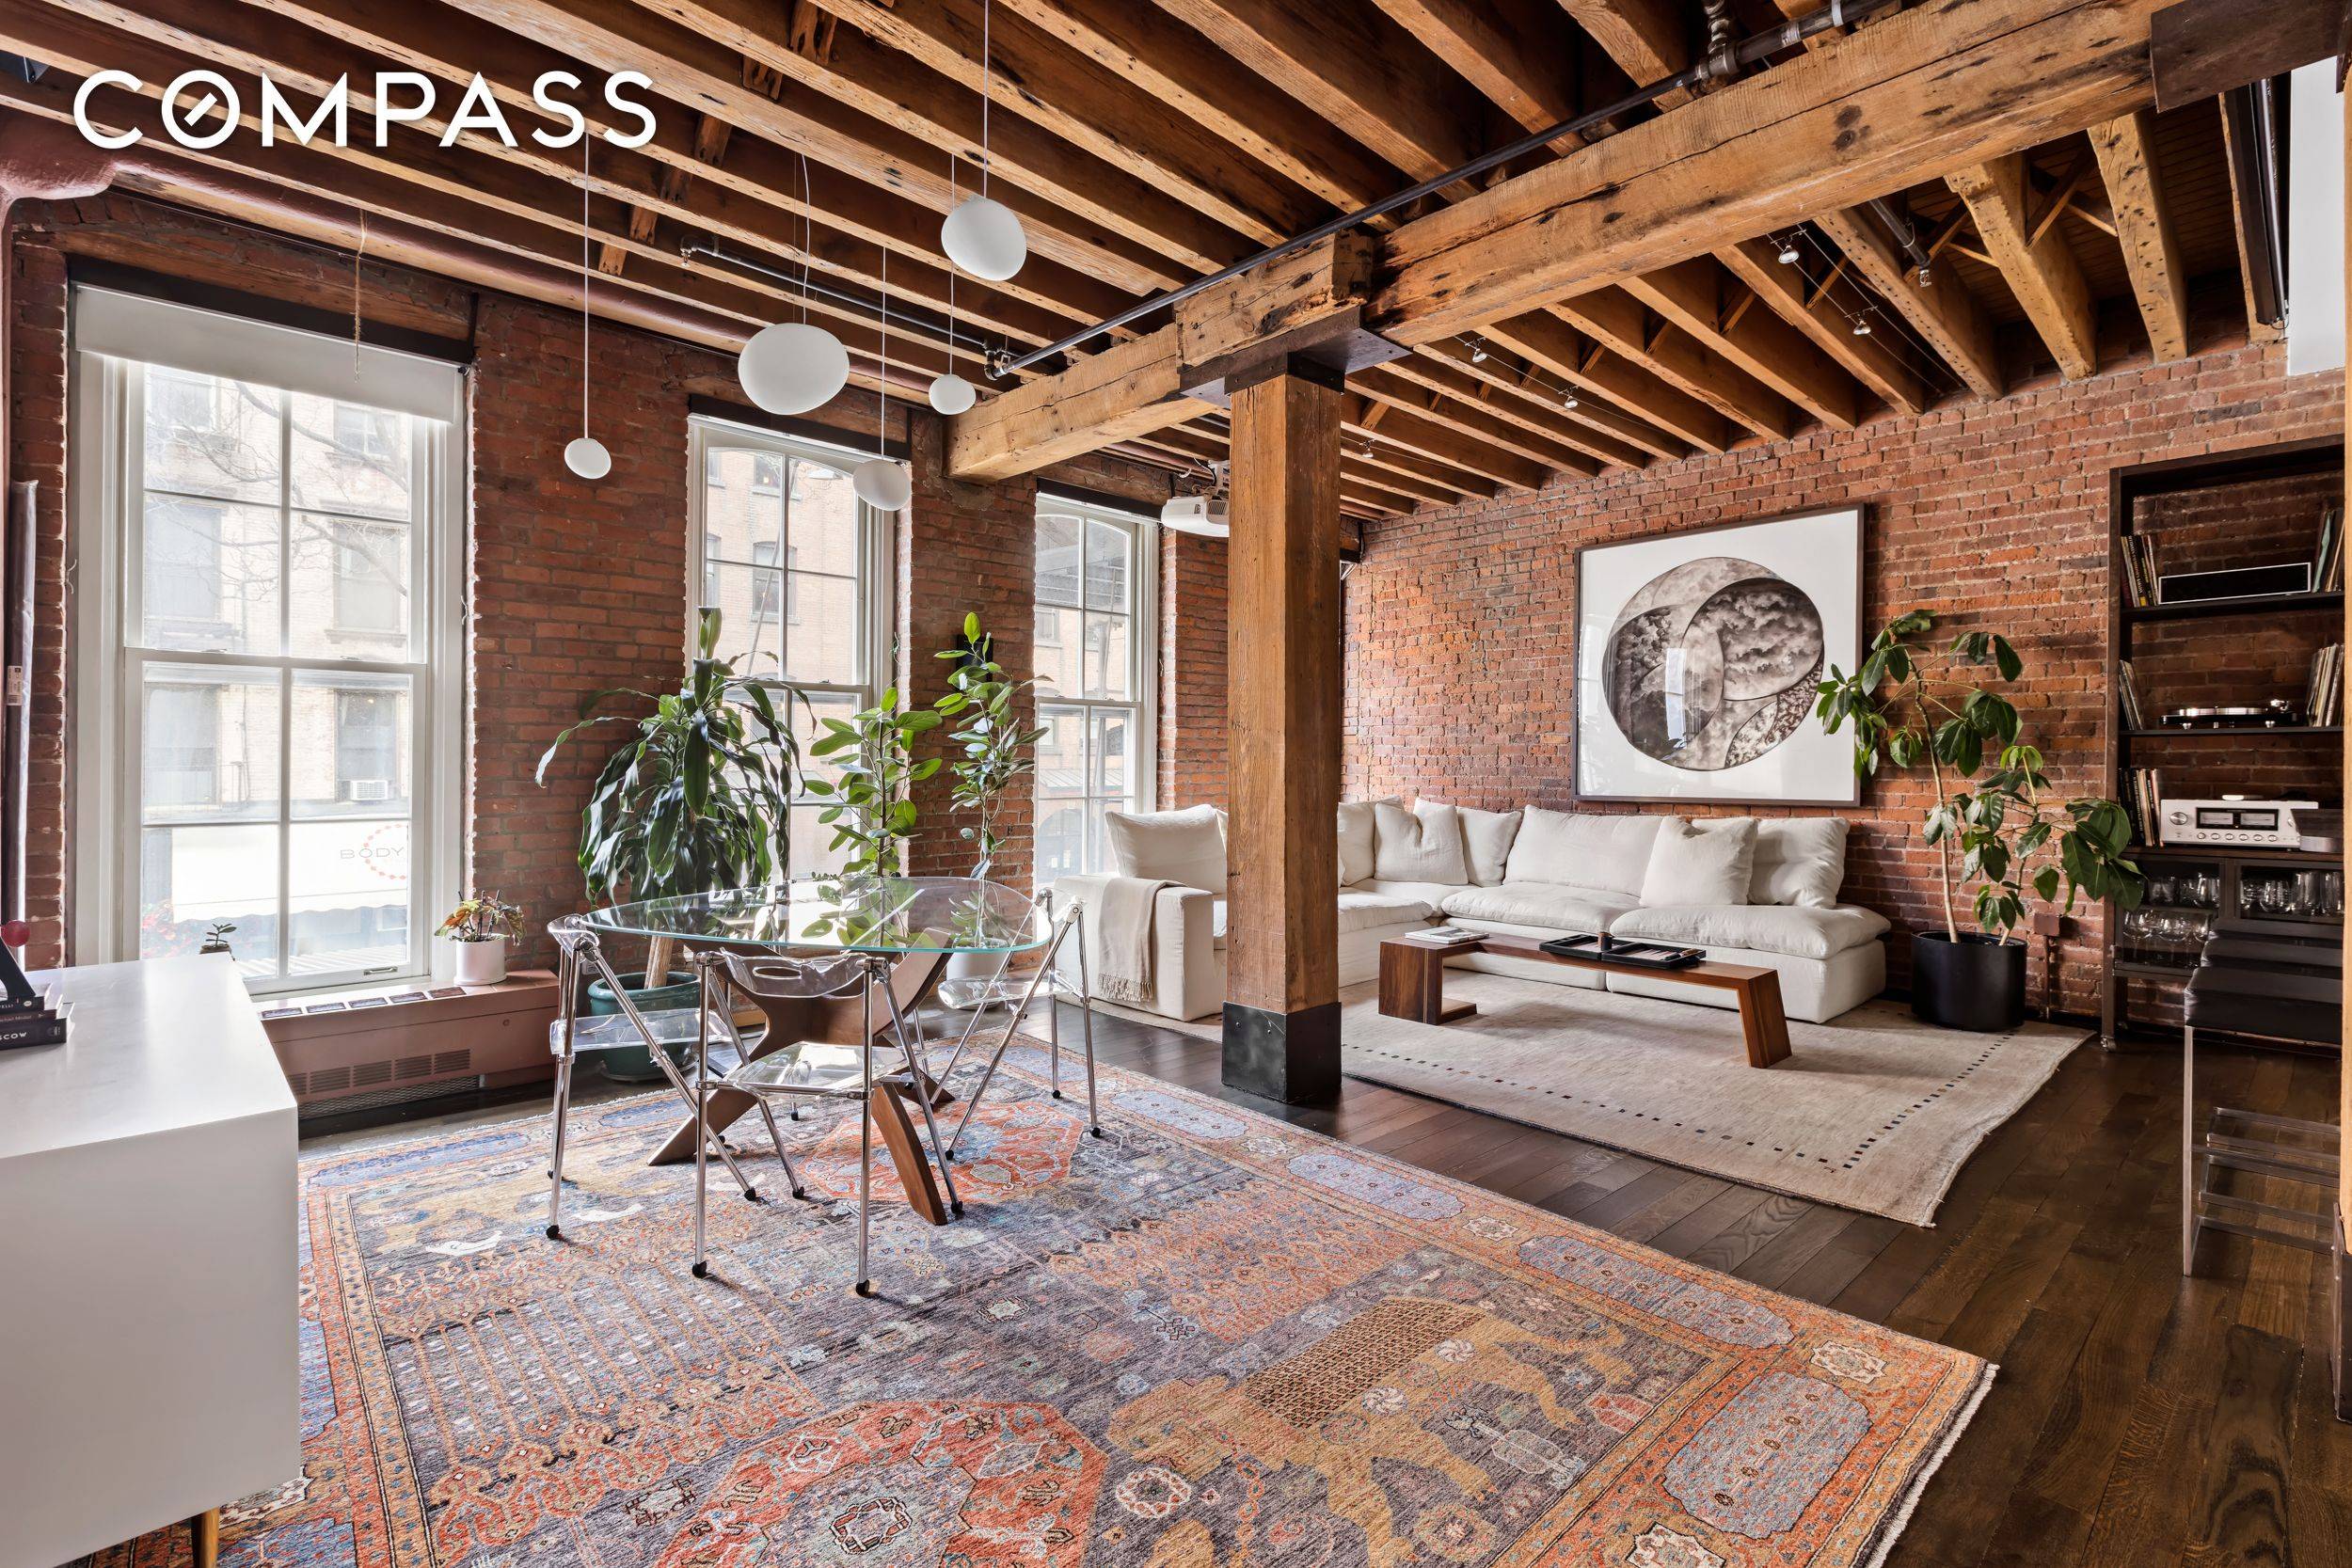 Authentic 2 BD 2 BA renovated loft with private terrace in prime Tribeca Historic District.